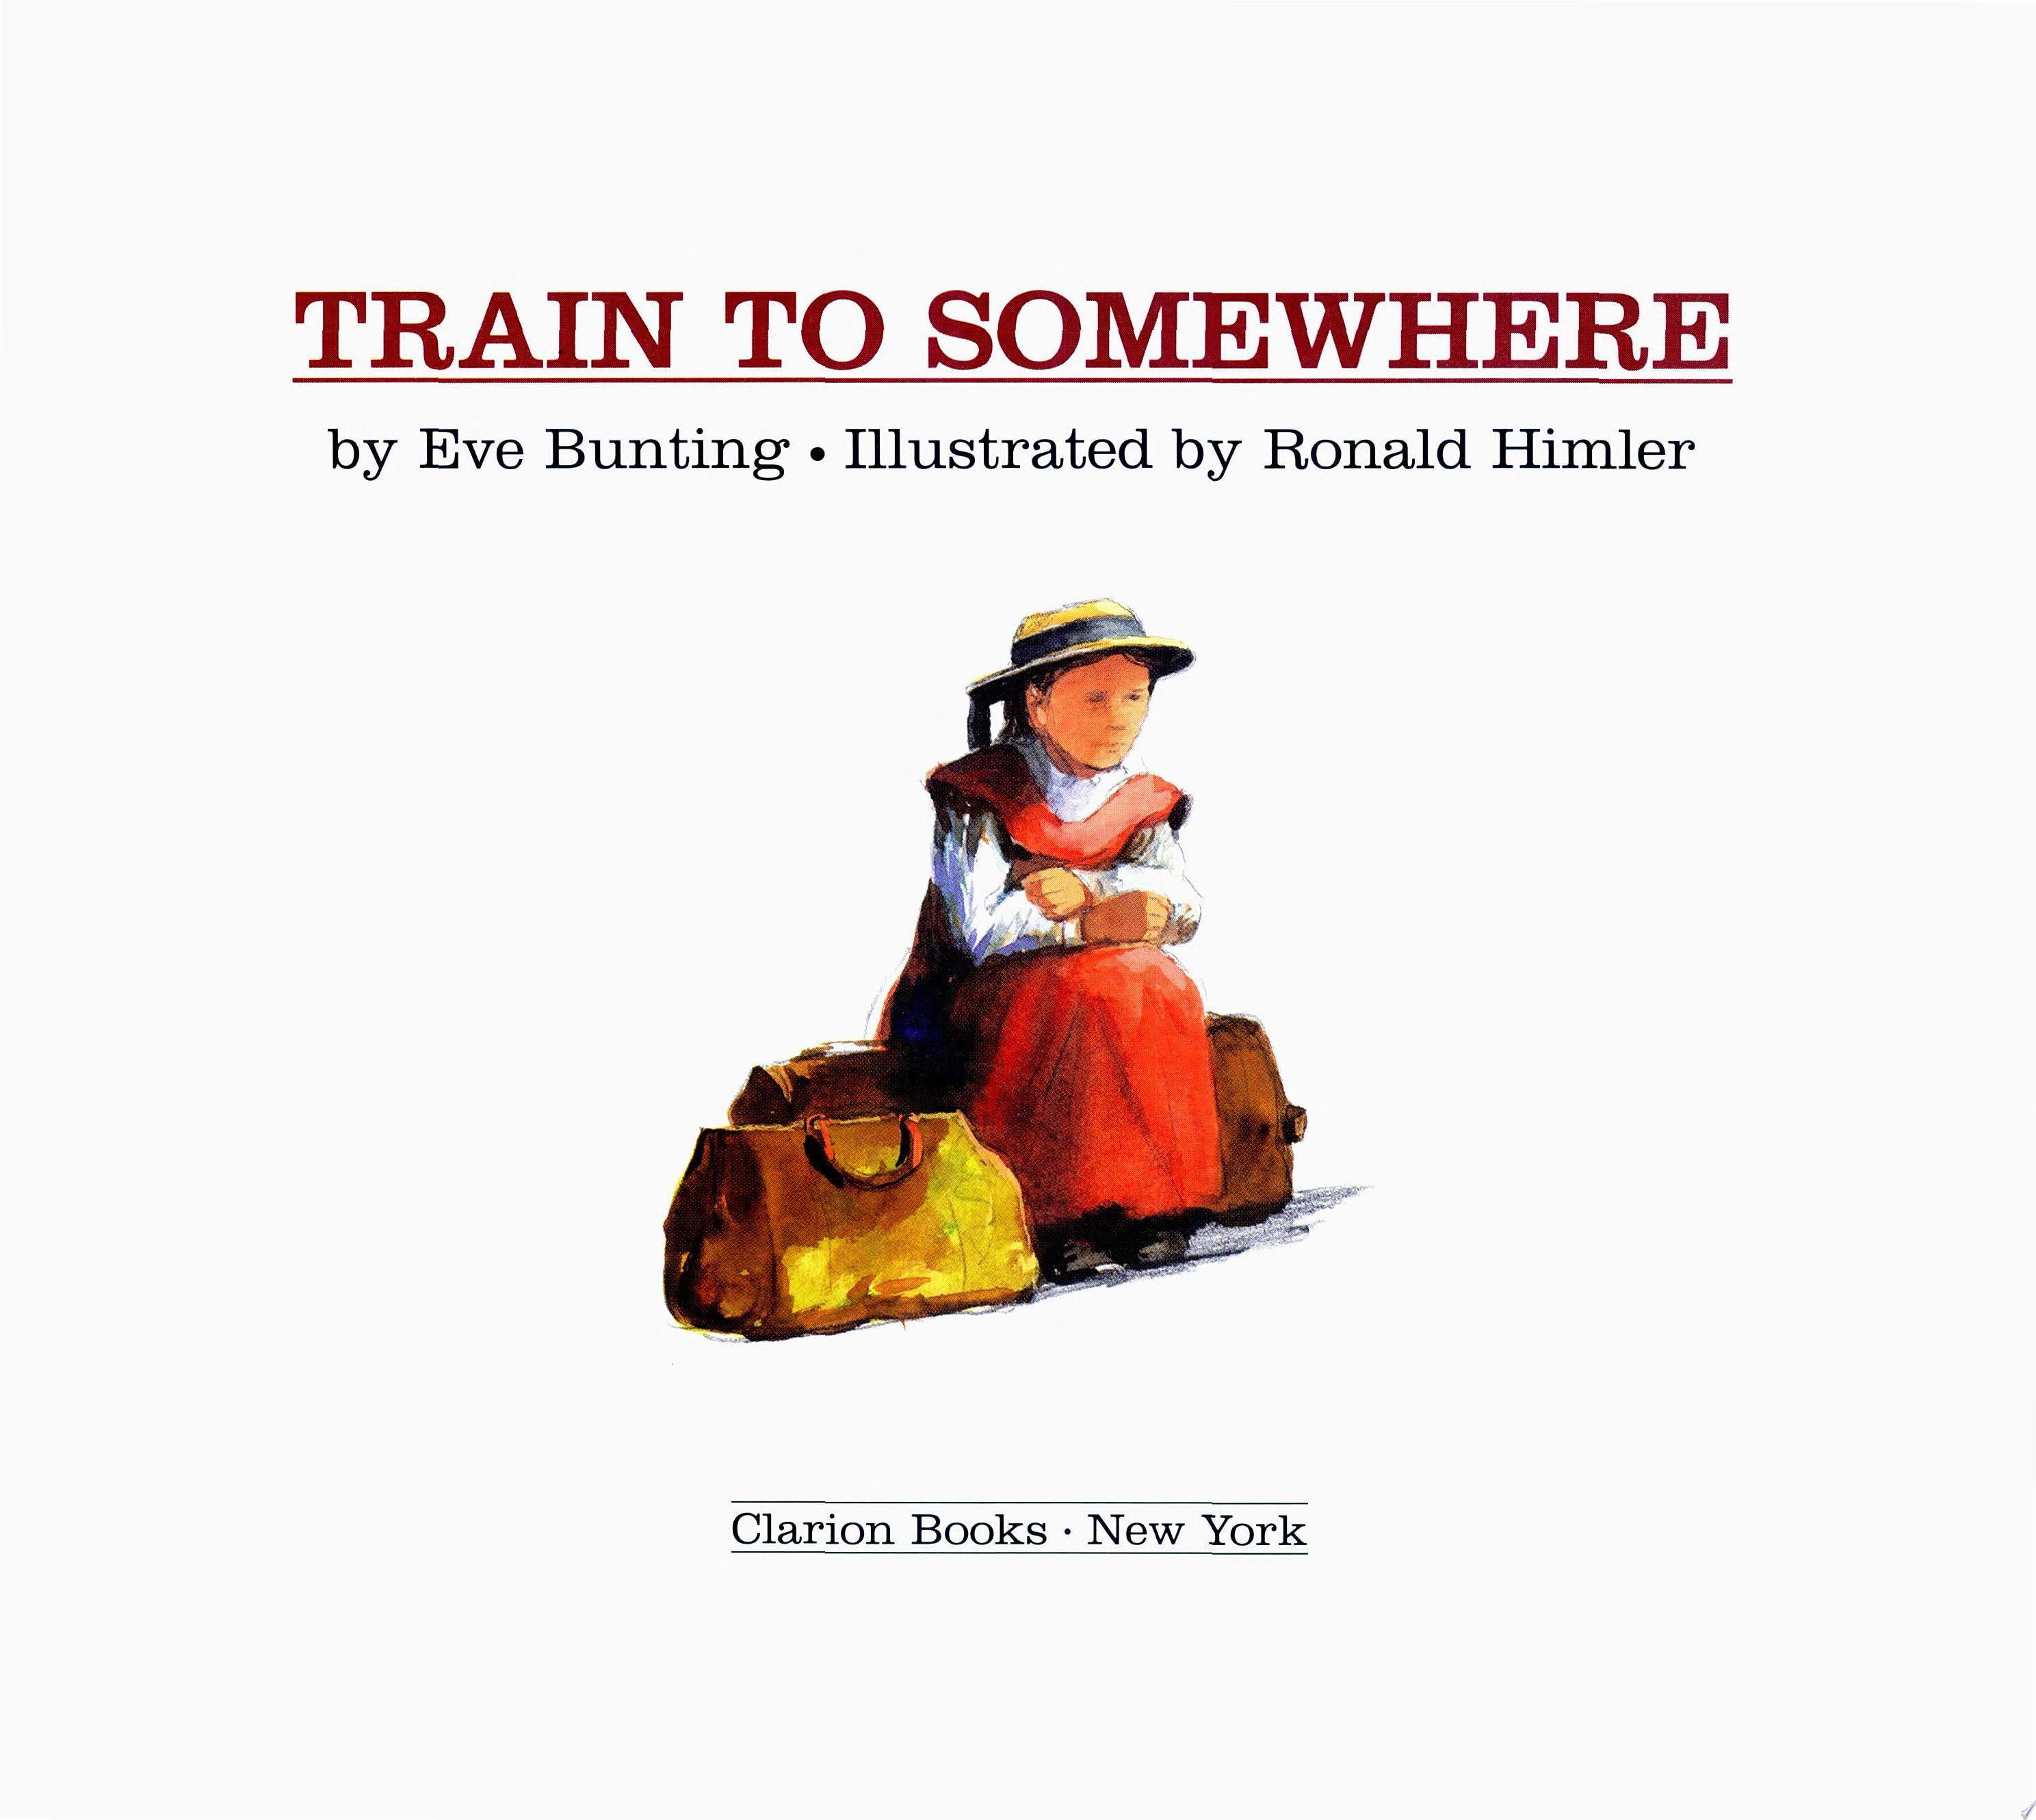 Image for "Train to Somewhere"